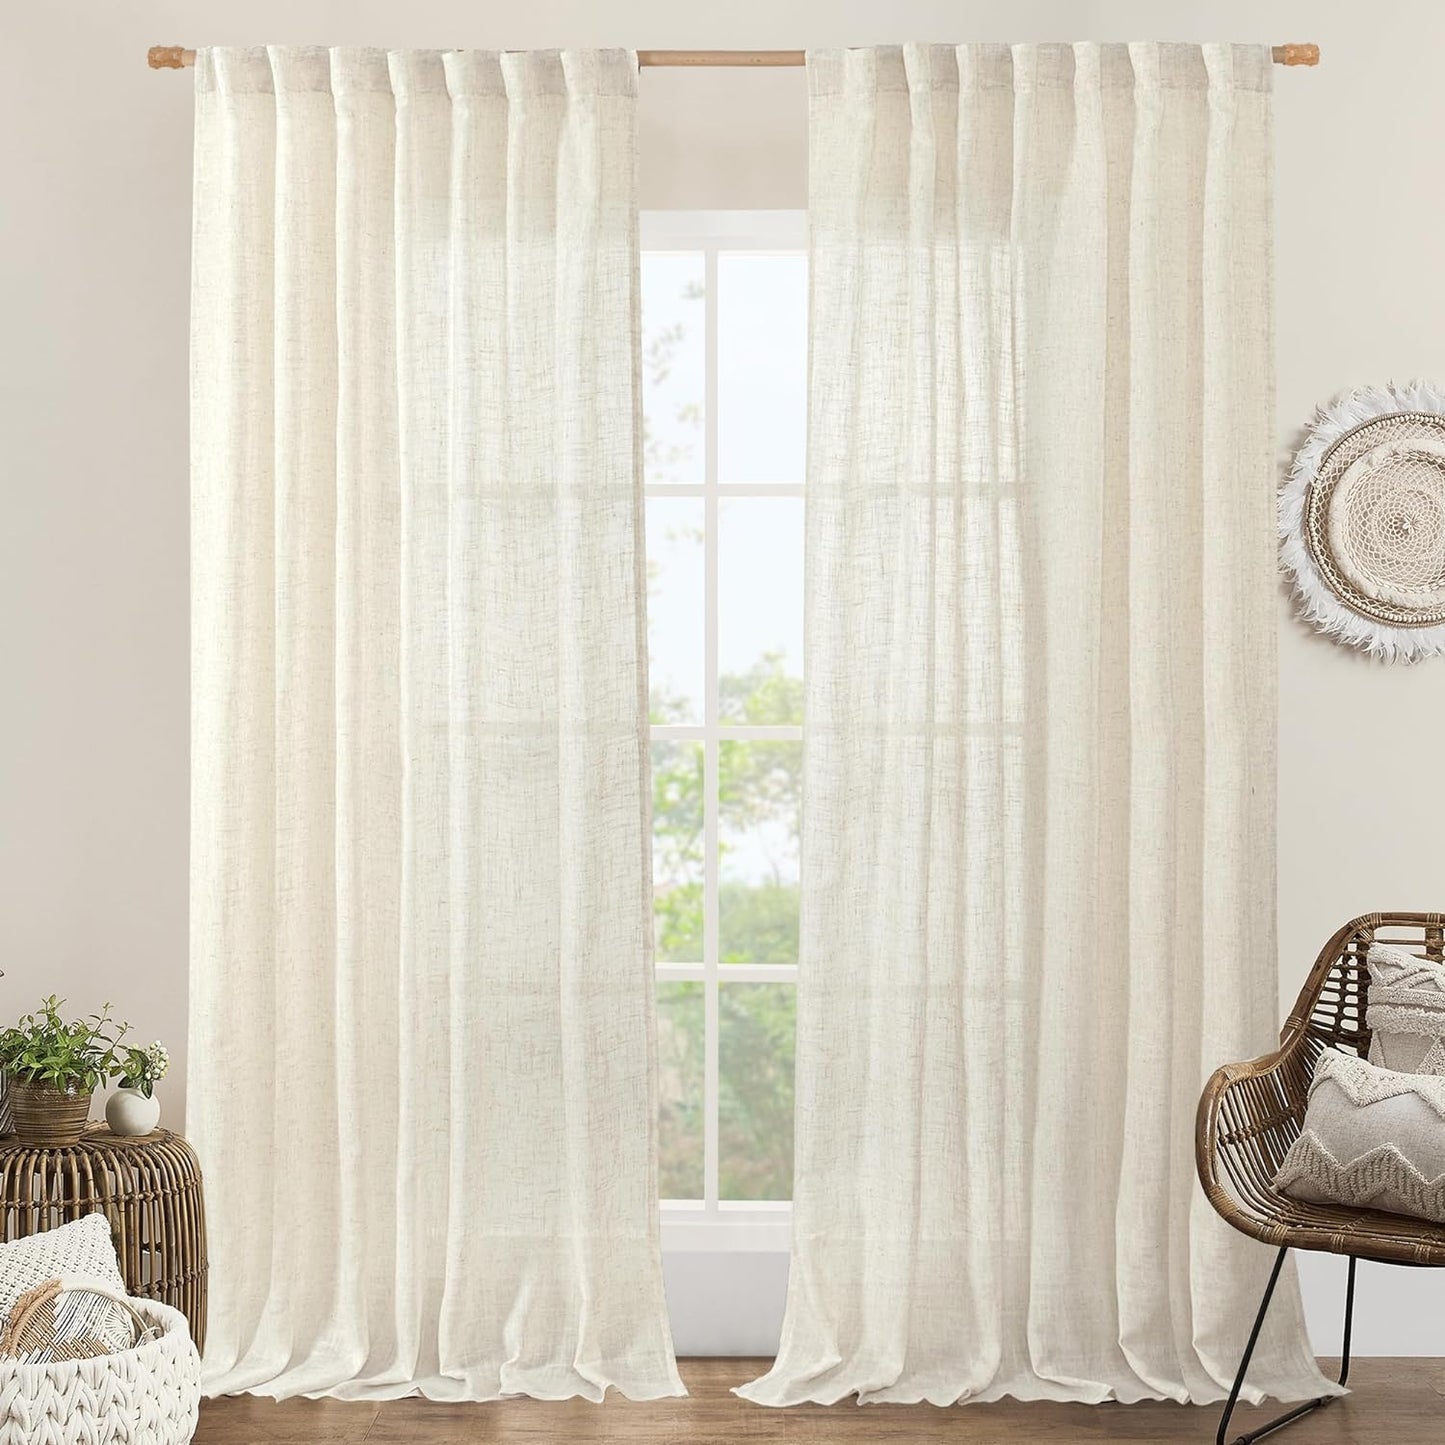 LAMIT Natural Linen Blended Curtains for Living Room, Back Tab and Rod Pocket Semi Sheer Curtains Light Filtering Country Rustic Drapes for Bedroom/Farmhouse, 2 Panels,52 X 108 Inch, Linen  LAMIT Natural 60W X 84L 